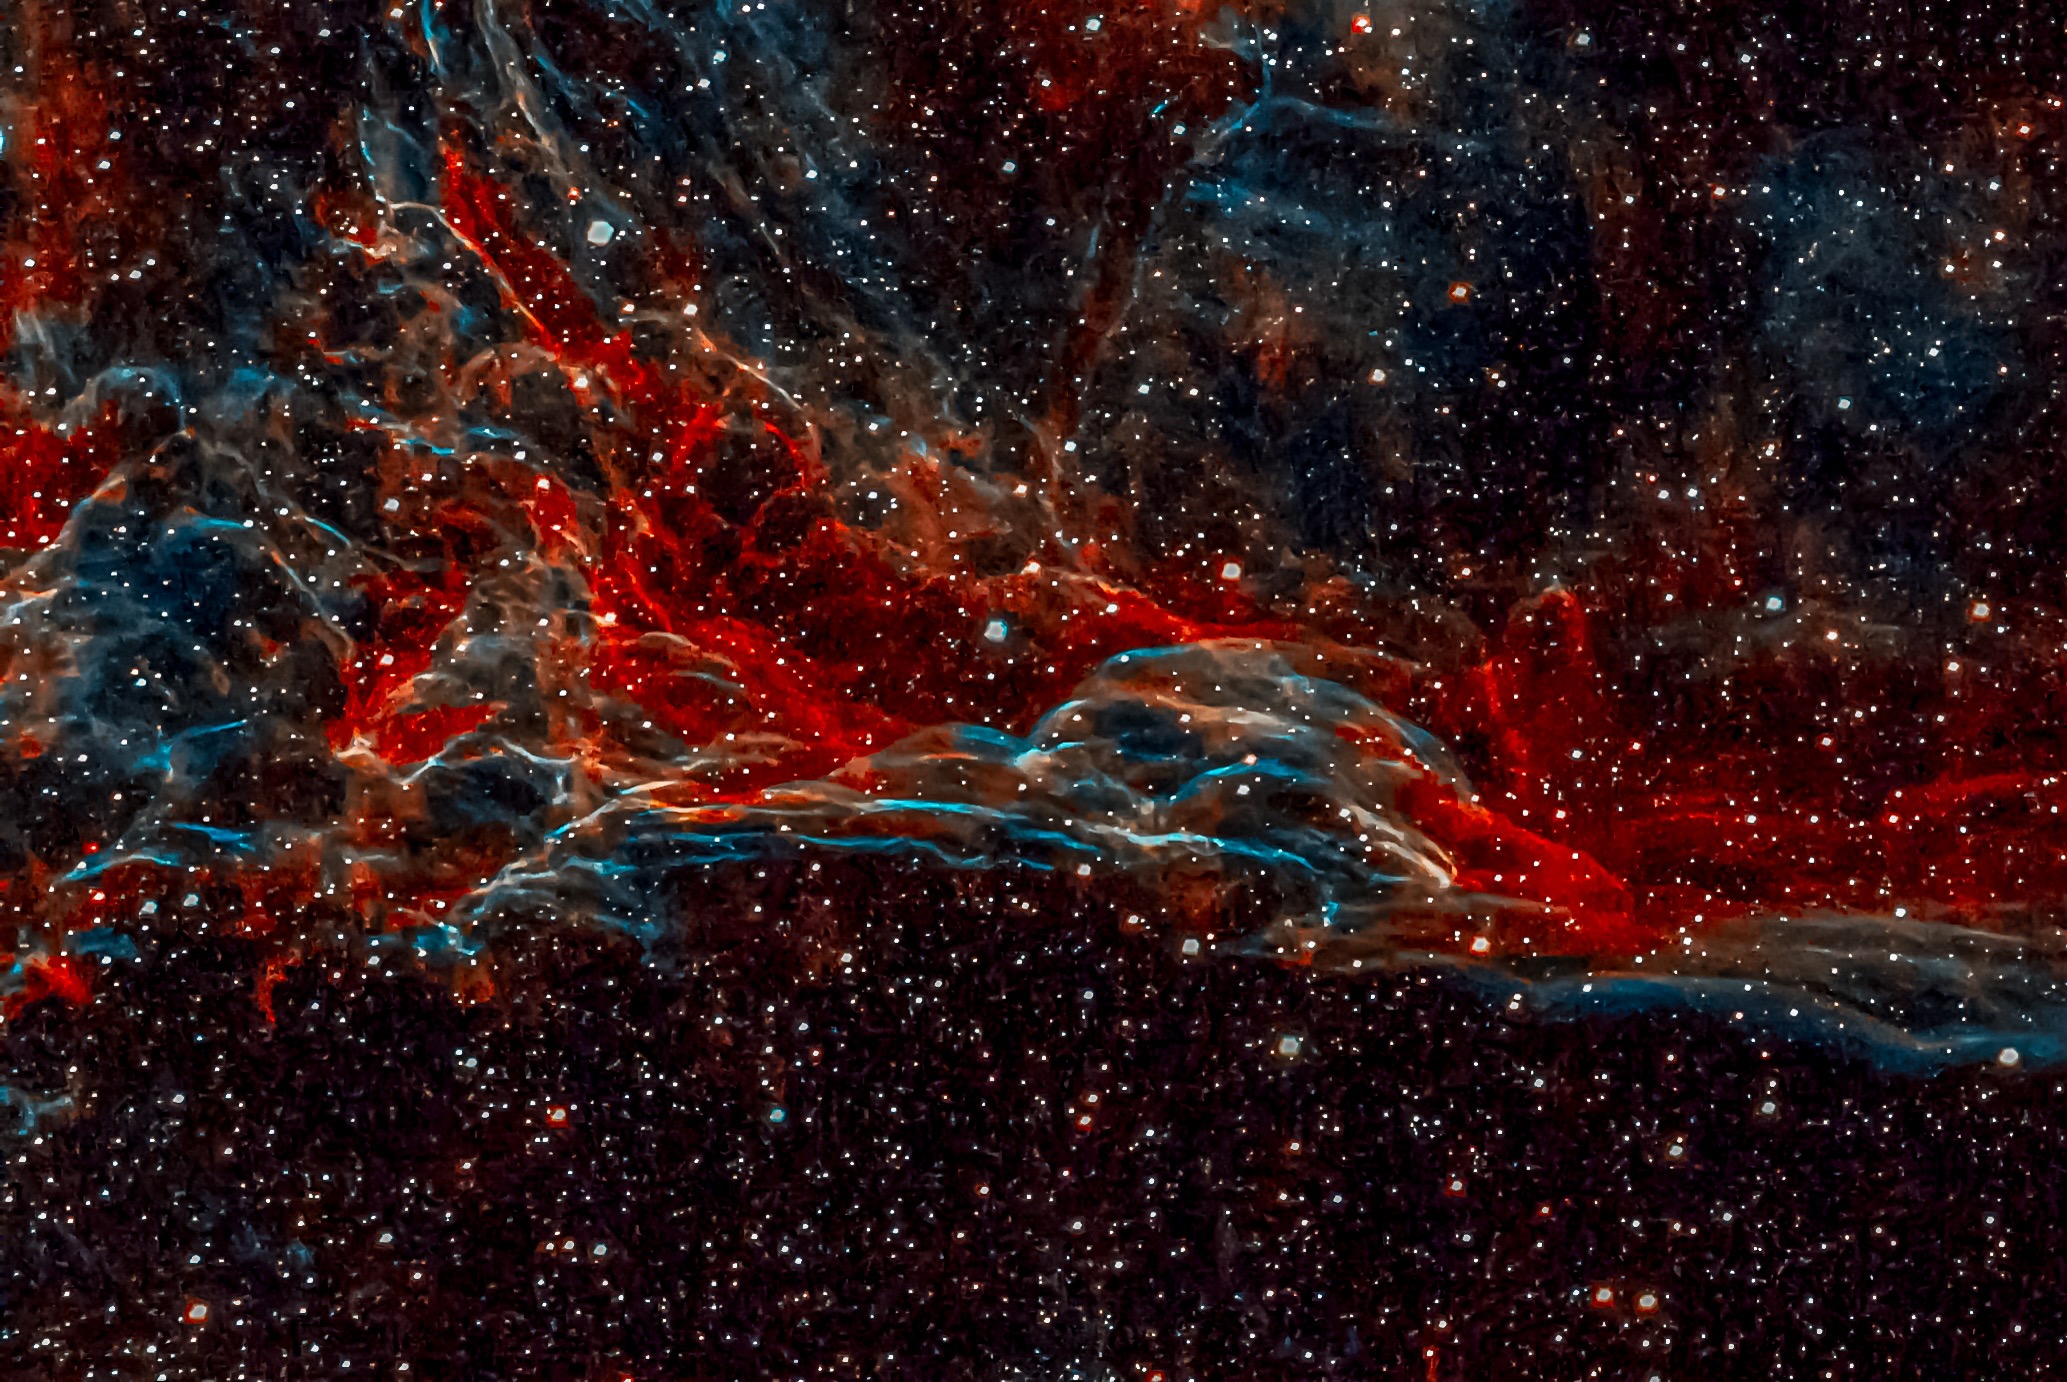 Another selection of Veil Nebula photographed in starless field. Source Supernova was a star 20 times more massive than the Sun which exploded between 10,000 and 20.000 years ago. At the time of explosion, the supernova would have appeared brighter than Venus in the sky.